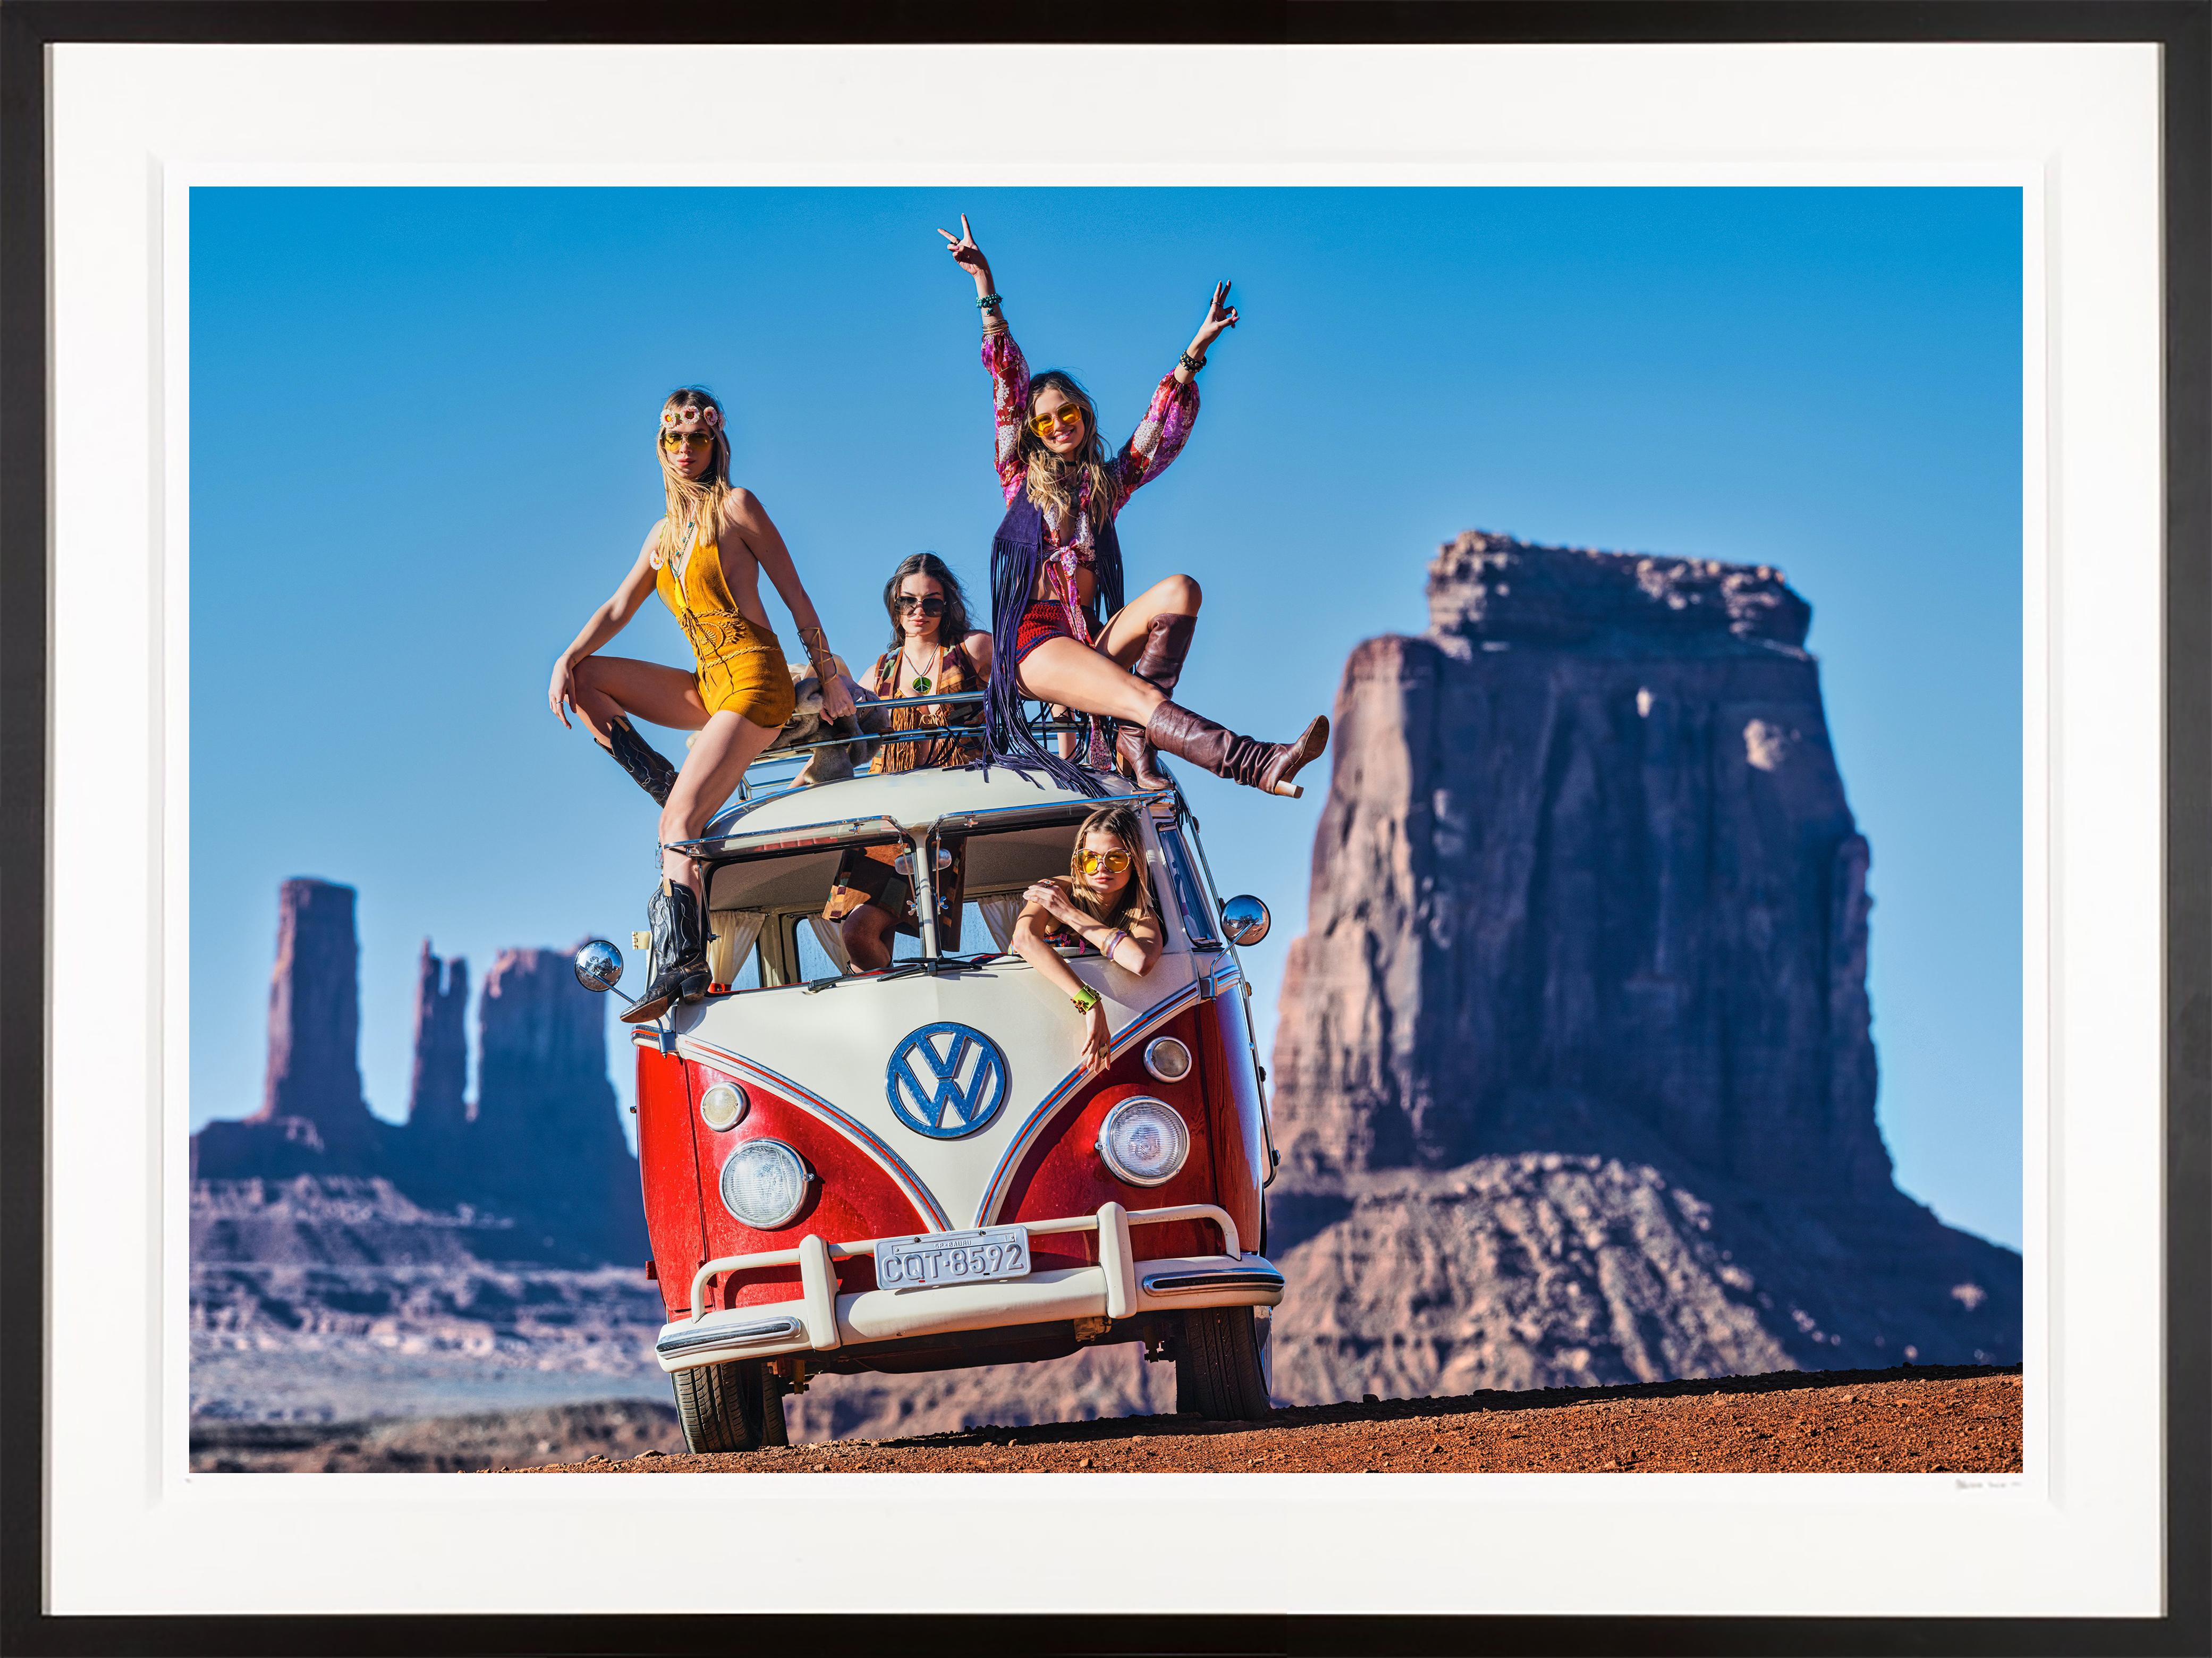 David Yarrow Color Photograph - "And The Party Never Ends" Sexy Photograph in Monument Valley with Vintage VW